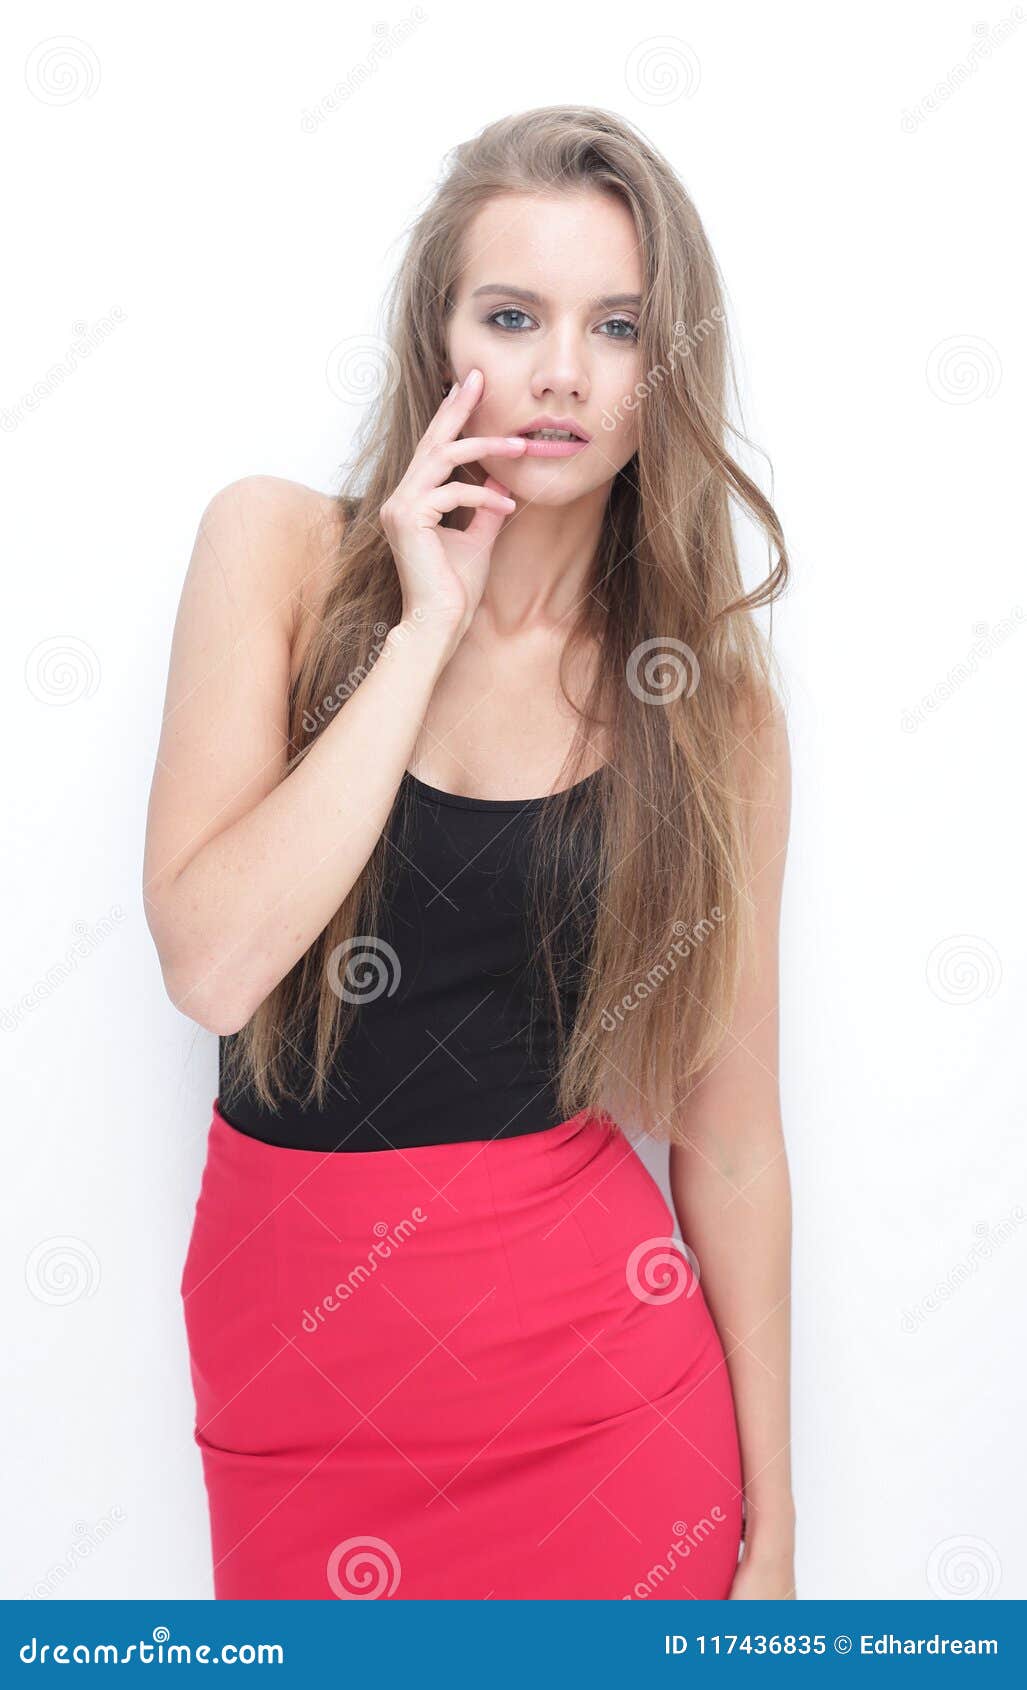 Girl Model Posing for the Camera Stock Image - Image of fashionable ...